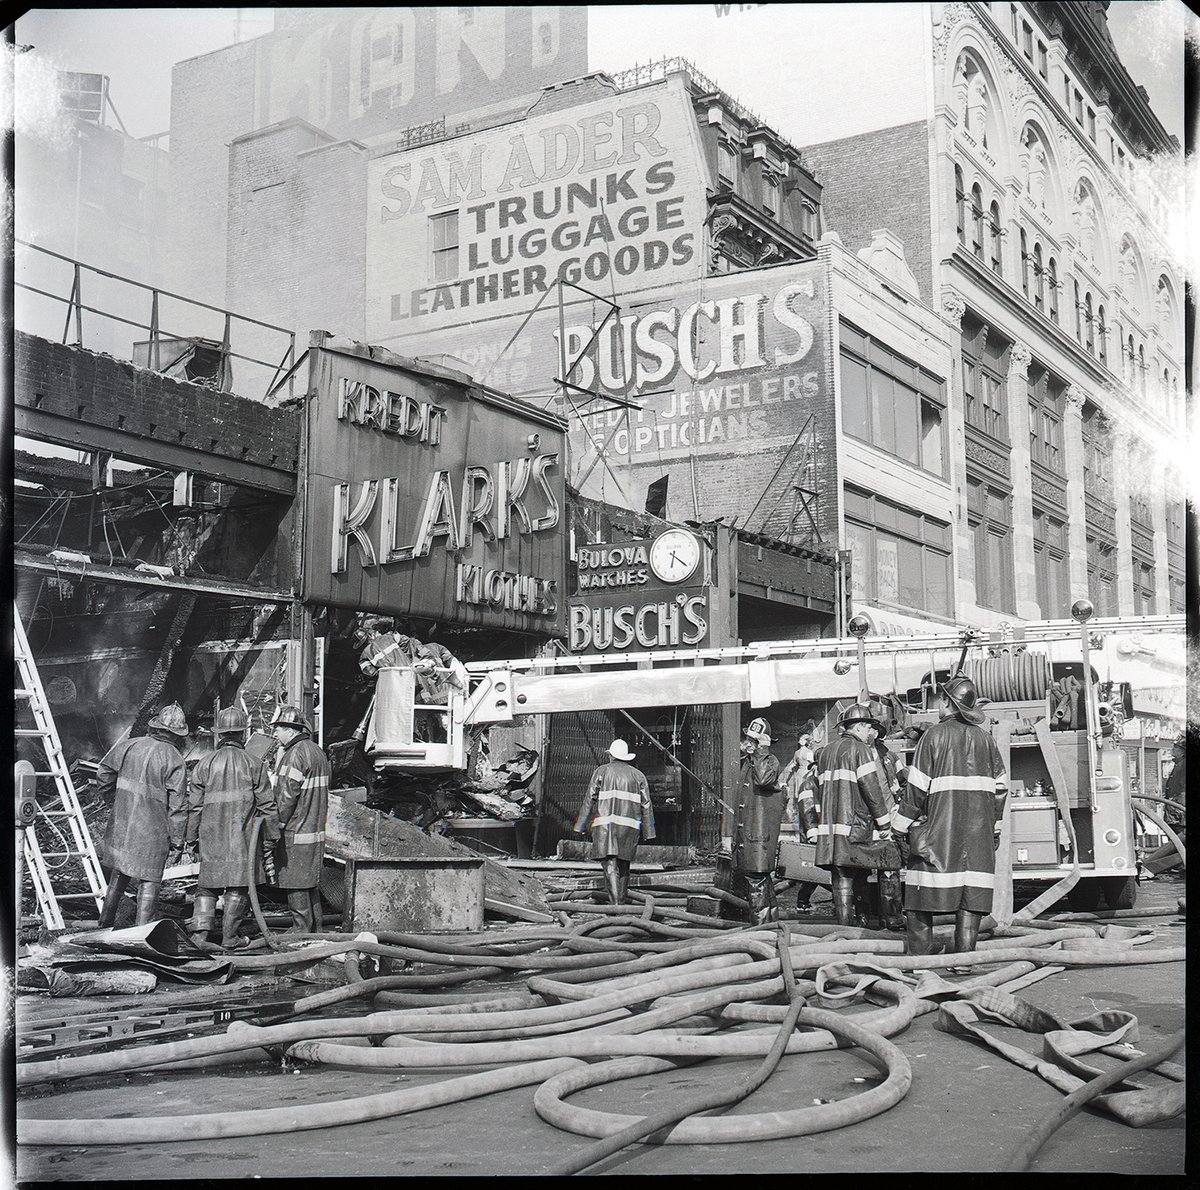 Today’s #ThrowbackThursday photo is from May 23, 1965. Firefighters responded to a 4-alarm fire at 128 West 125th Street in Manhattan. Learn more about FDNY history with the New York City Fire Museum Throwback Podcast, now available on Apple, Spotify, and Google Play.